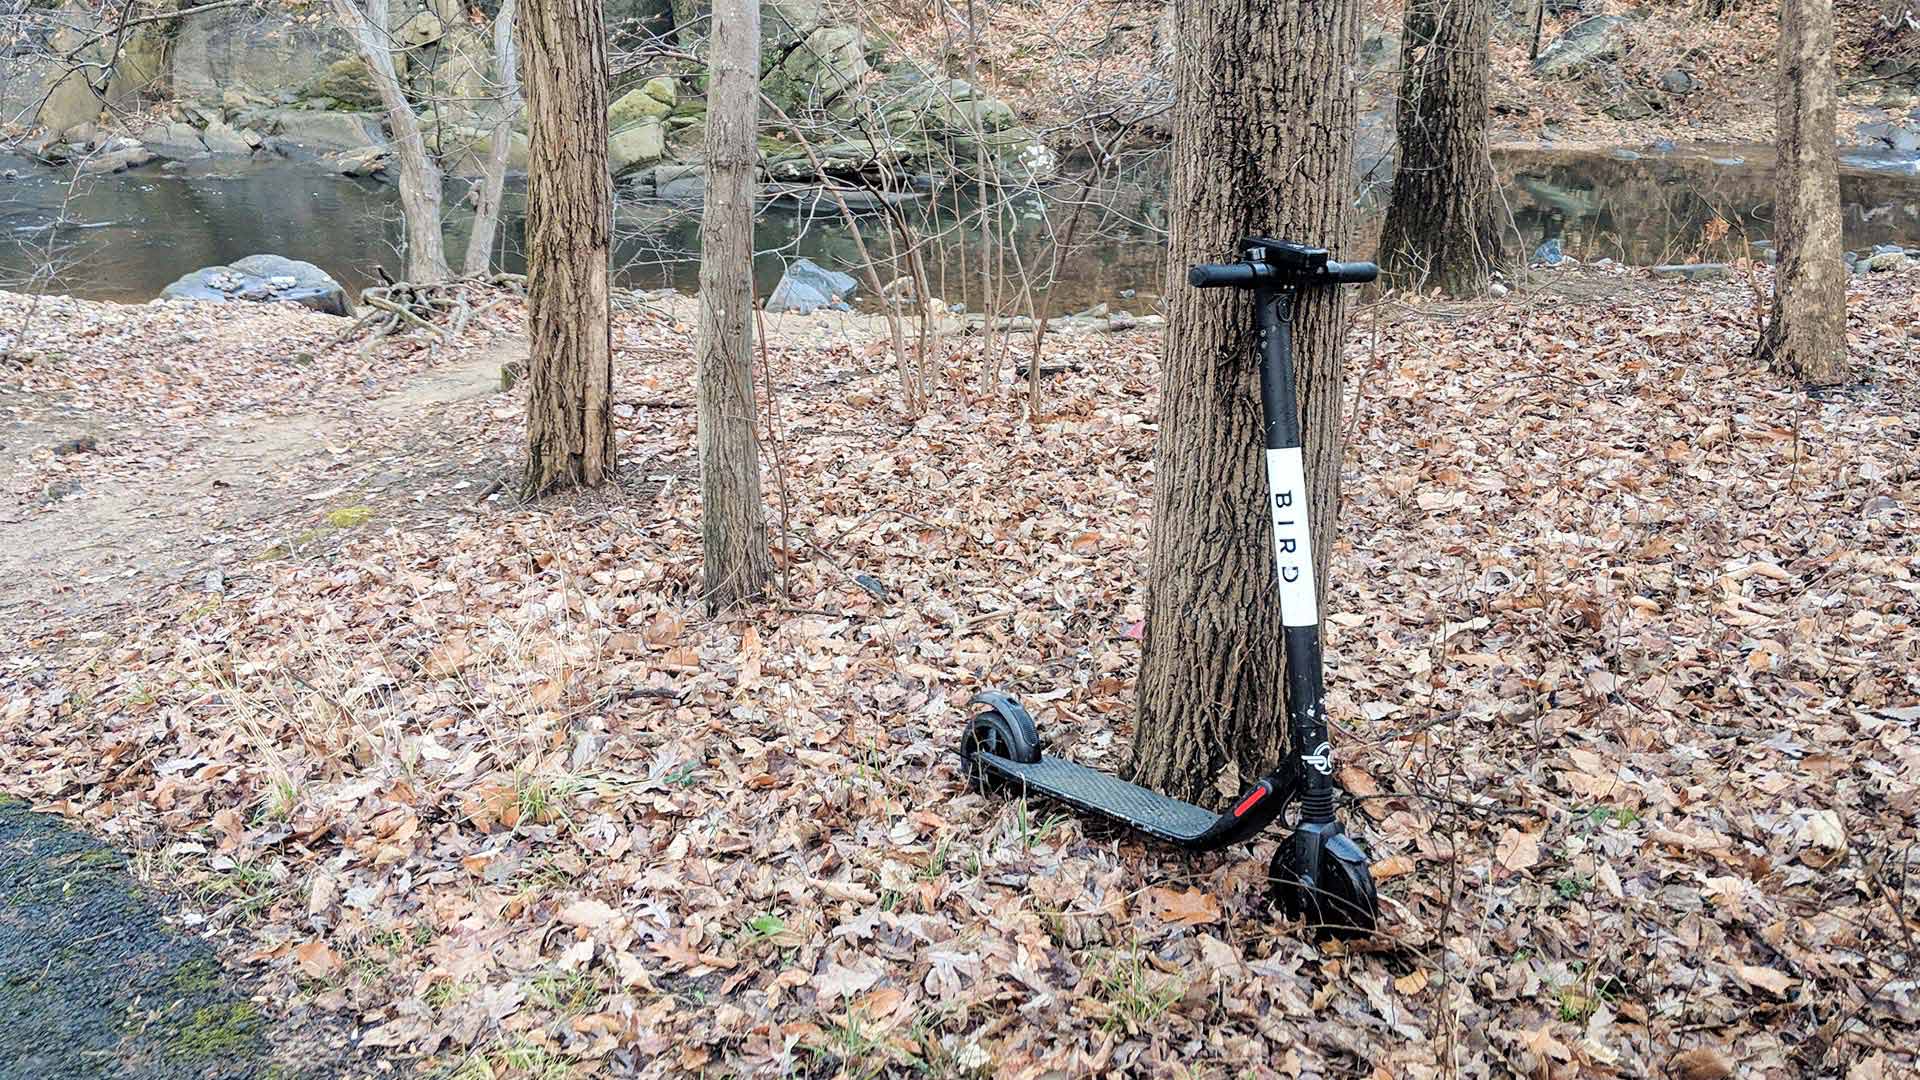 An e-scooter left beside a trail in a park in the Washington, D.C., area.